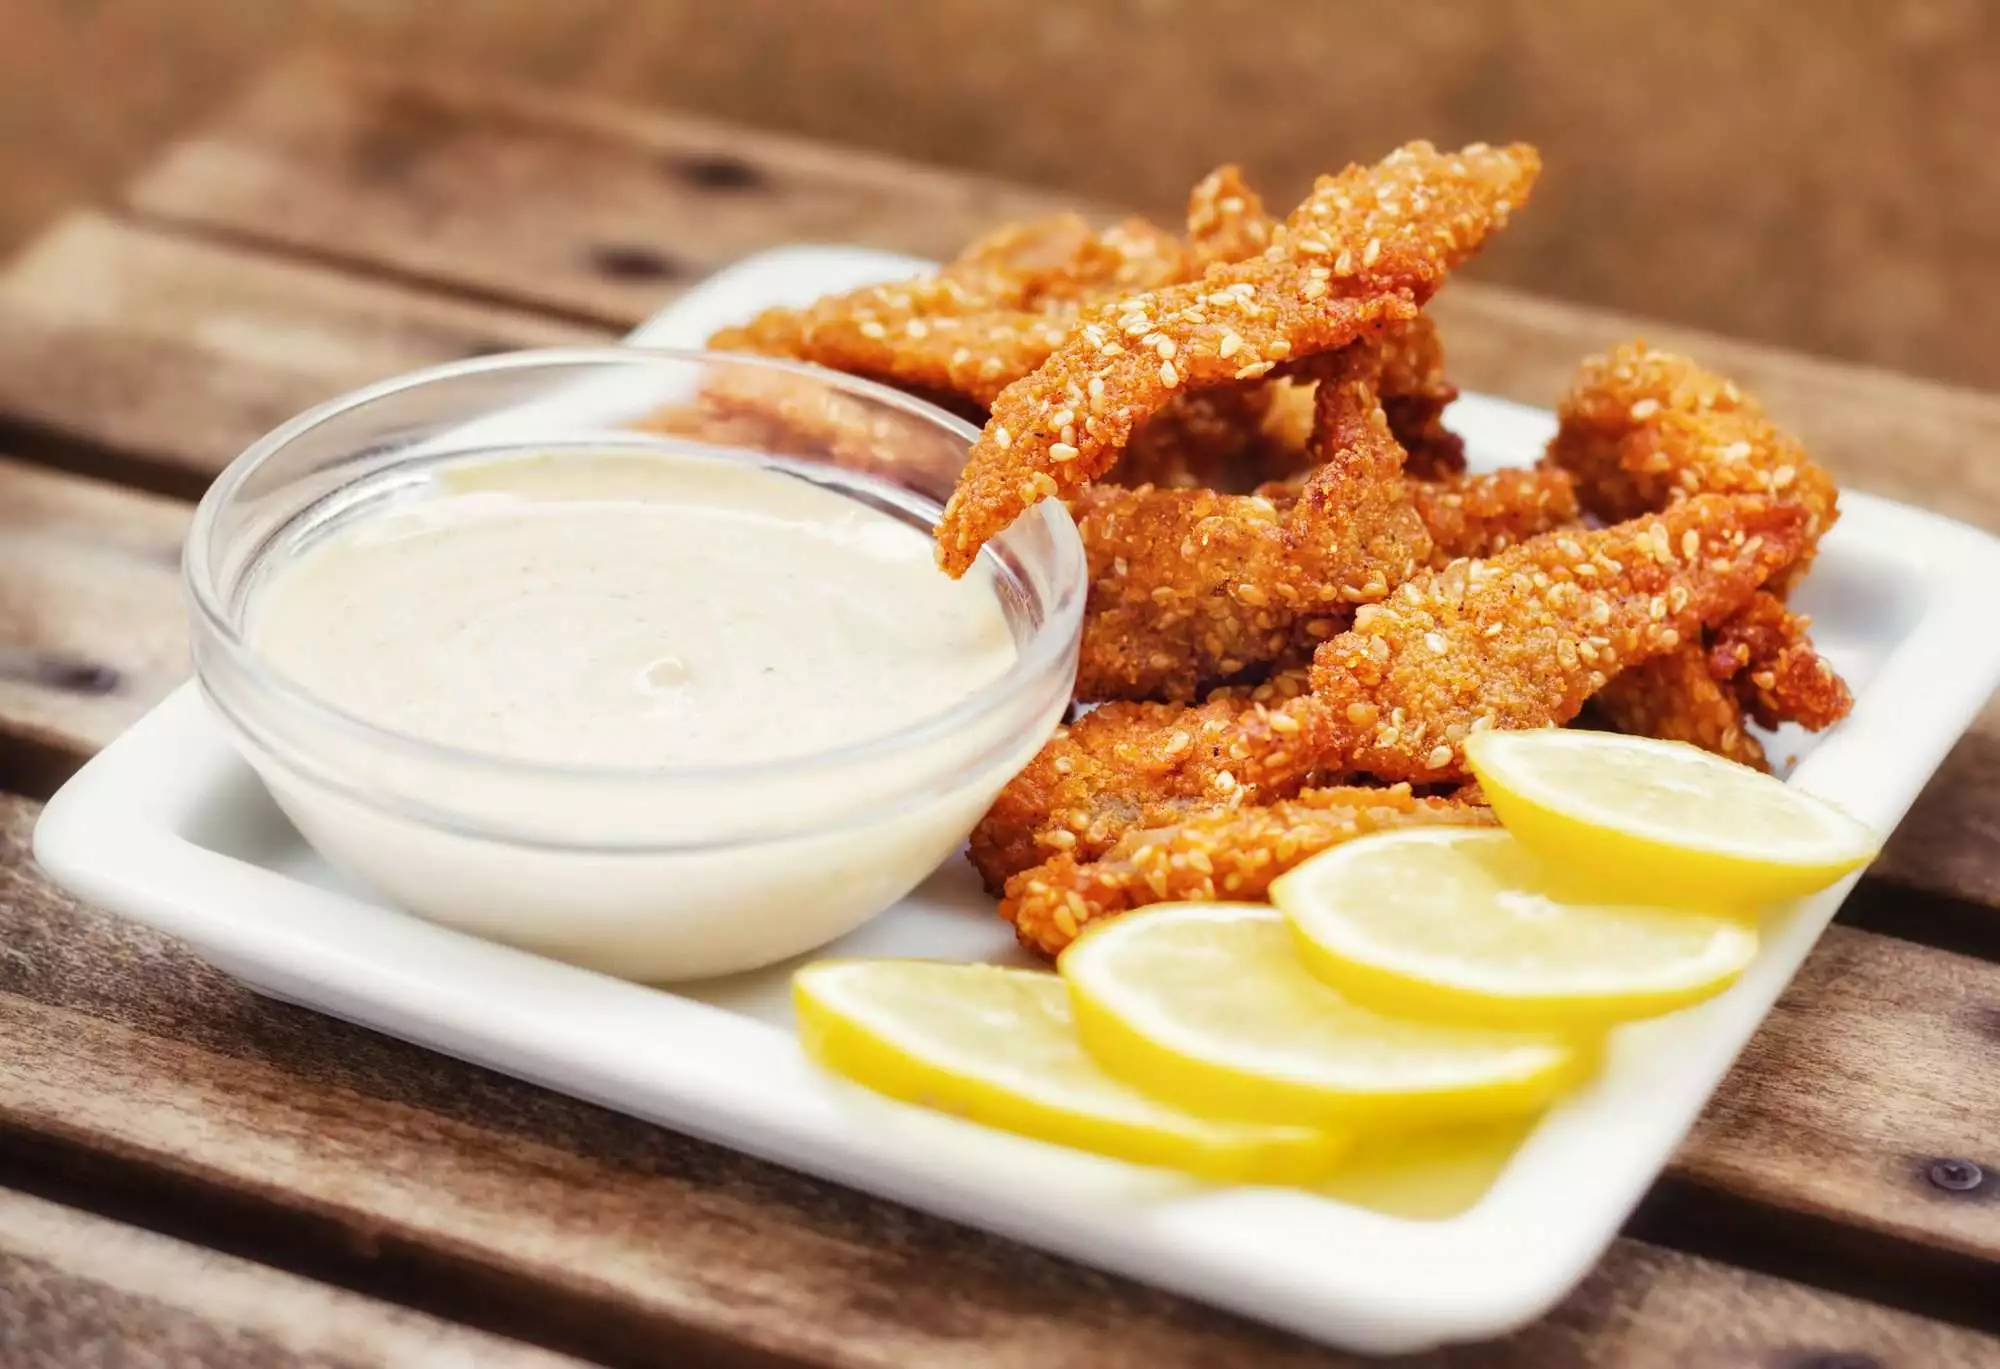 Chicken fingers served with tartar sauce and lemon slice